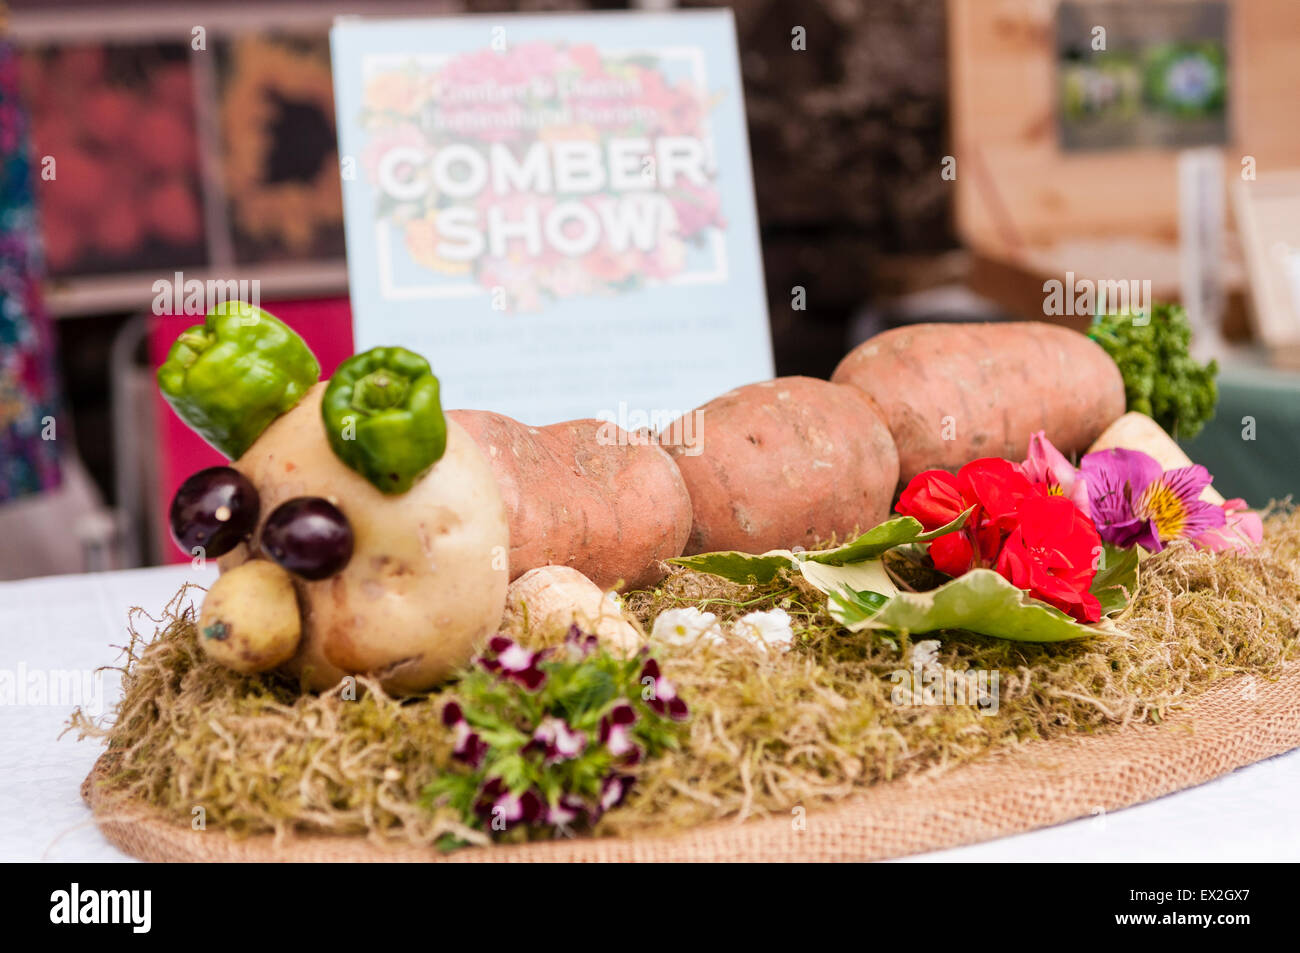 A snake/caterpillar made out of potatoes at the Comber Potato Festival, Northern Ireland Stock Photo